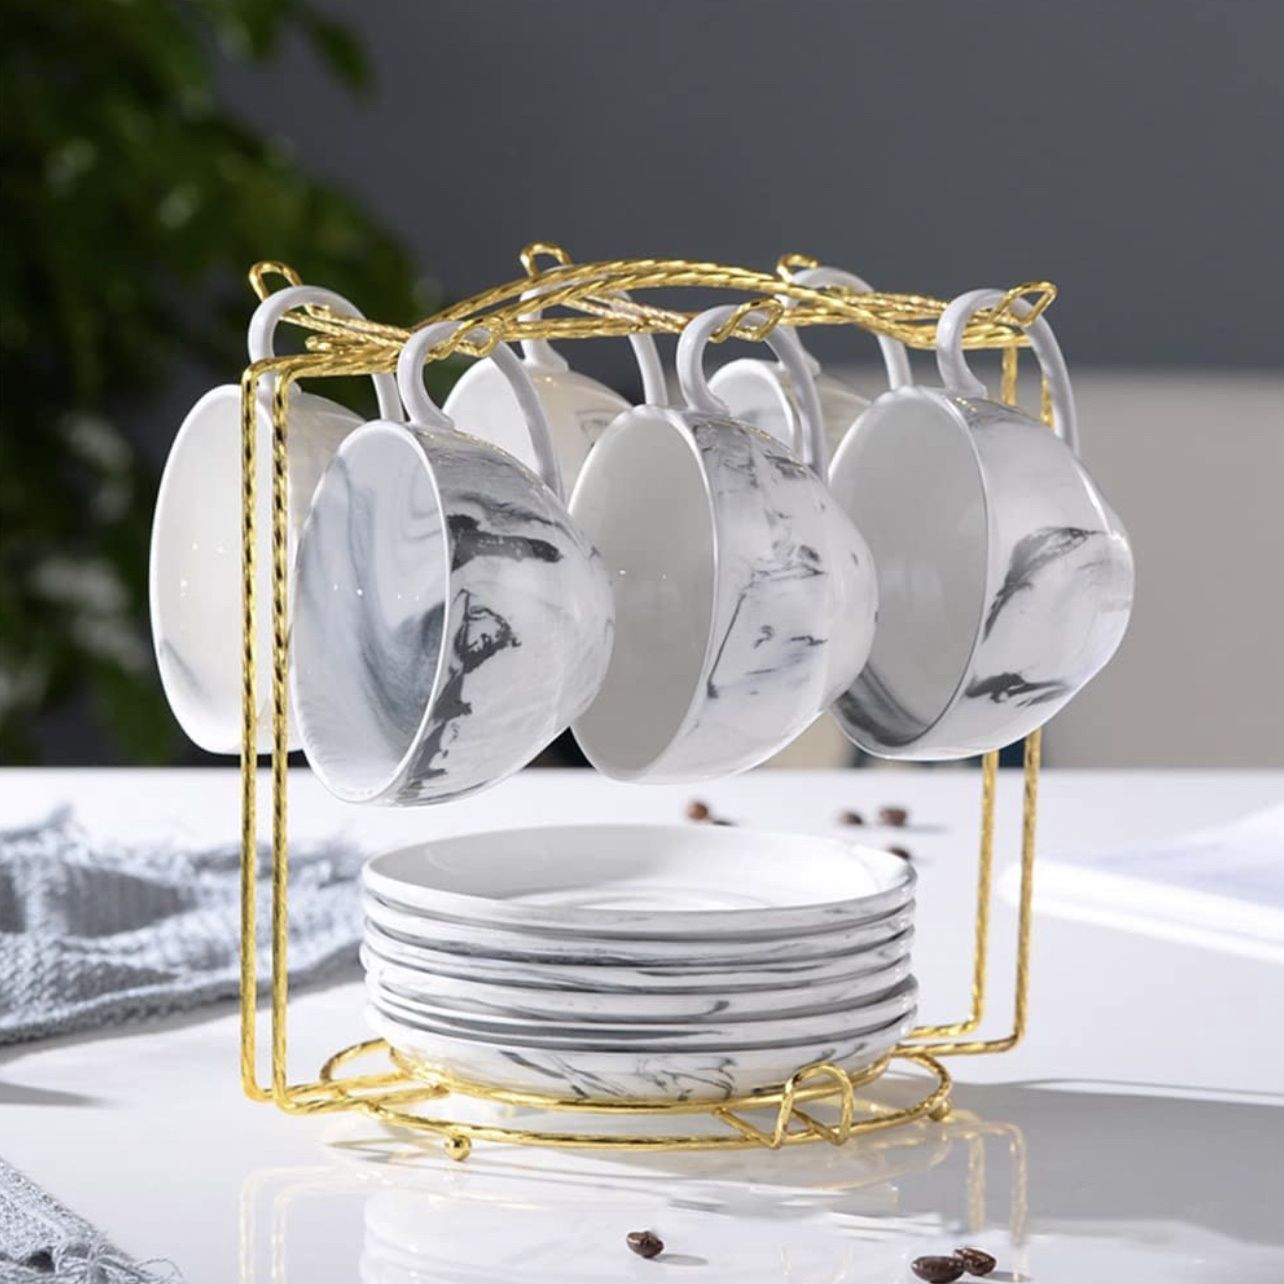  Coffee Mug Holder, Espresso Cups Holder Cup Drying Rack Cups Drainer Stand Metal Mug Tree Cups Organizer with 6 Hook Hangers for Kitchen Counter and 